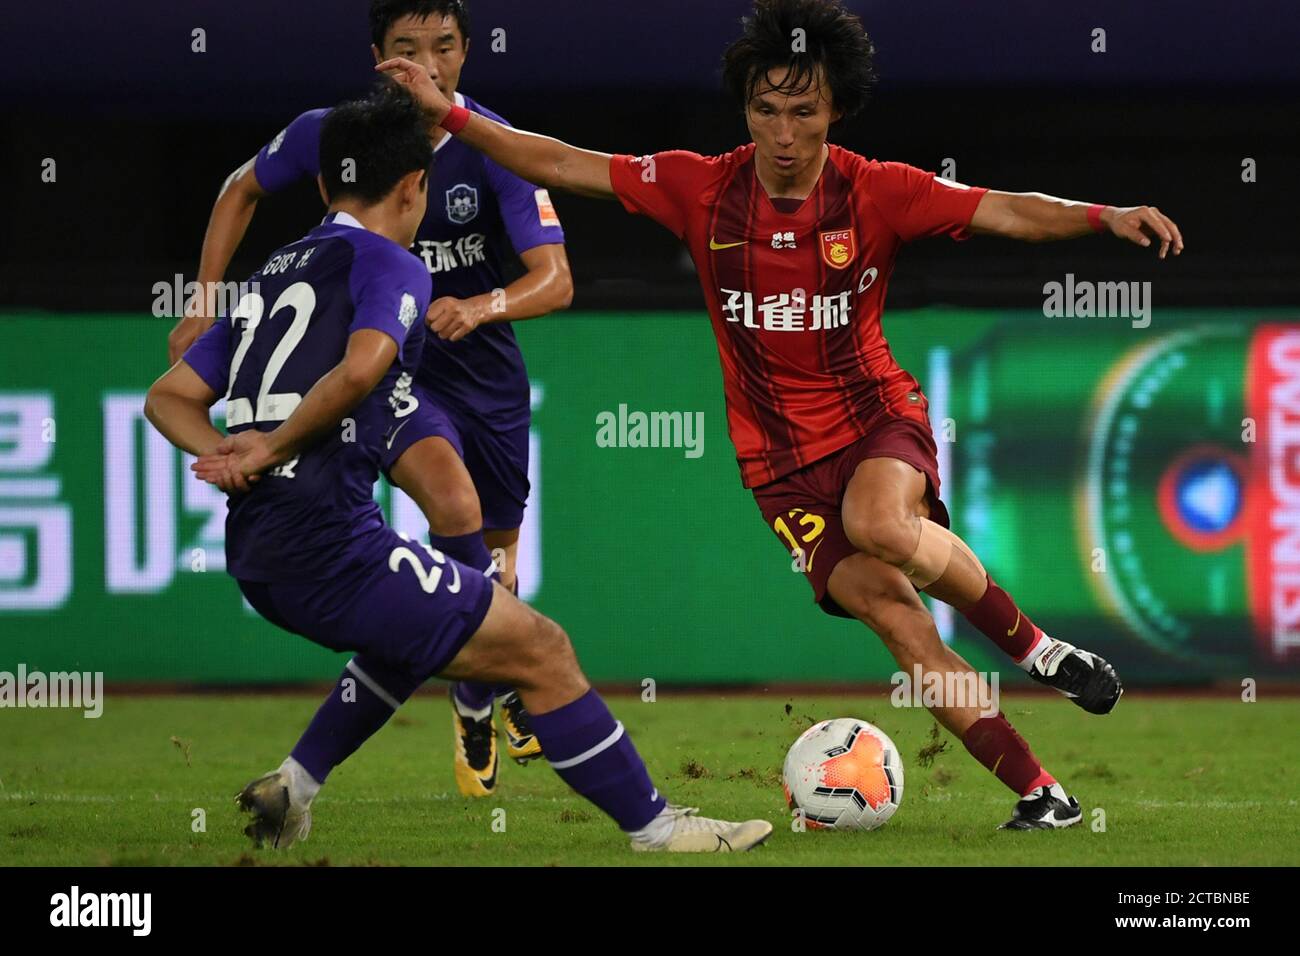 Suzhou, China's Jiangsu Province. 22nd Sep, 2020. Yin Hongbo (R) of Hebei China Fortune vies for the ball during the 12th round match between Hebei China Fortune and Tianjin Taida at the postponed 2020 season Chinese Football Association Super League (CSL) Suzhou Division in Suzhou, east China's Jiangsu Province, Sept. 22, 2020. Heibei China Fortune won 1-0. Credit: Han Yuqing/Xinhua/Alamy Live News Stock Photo